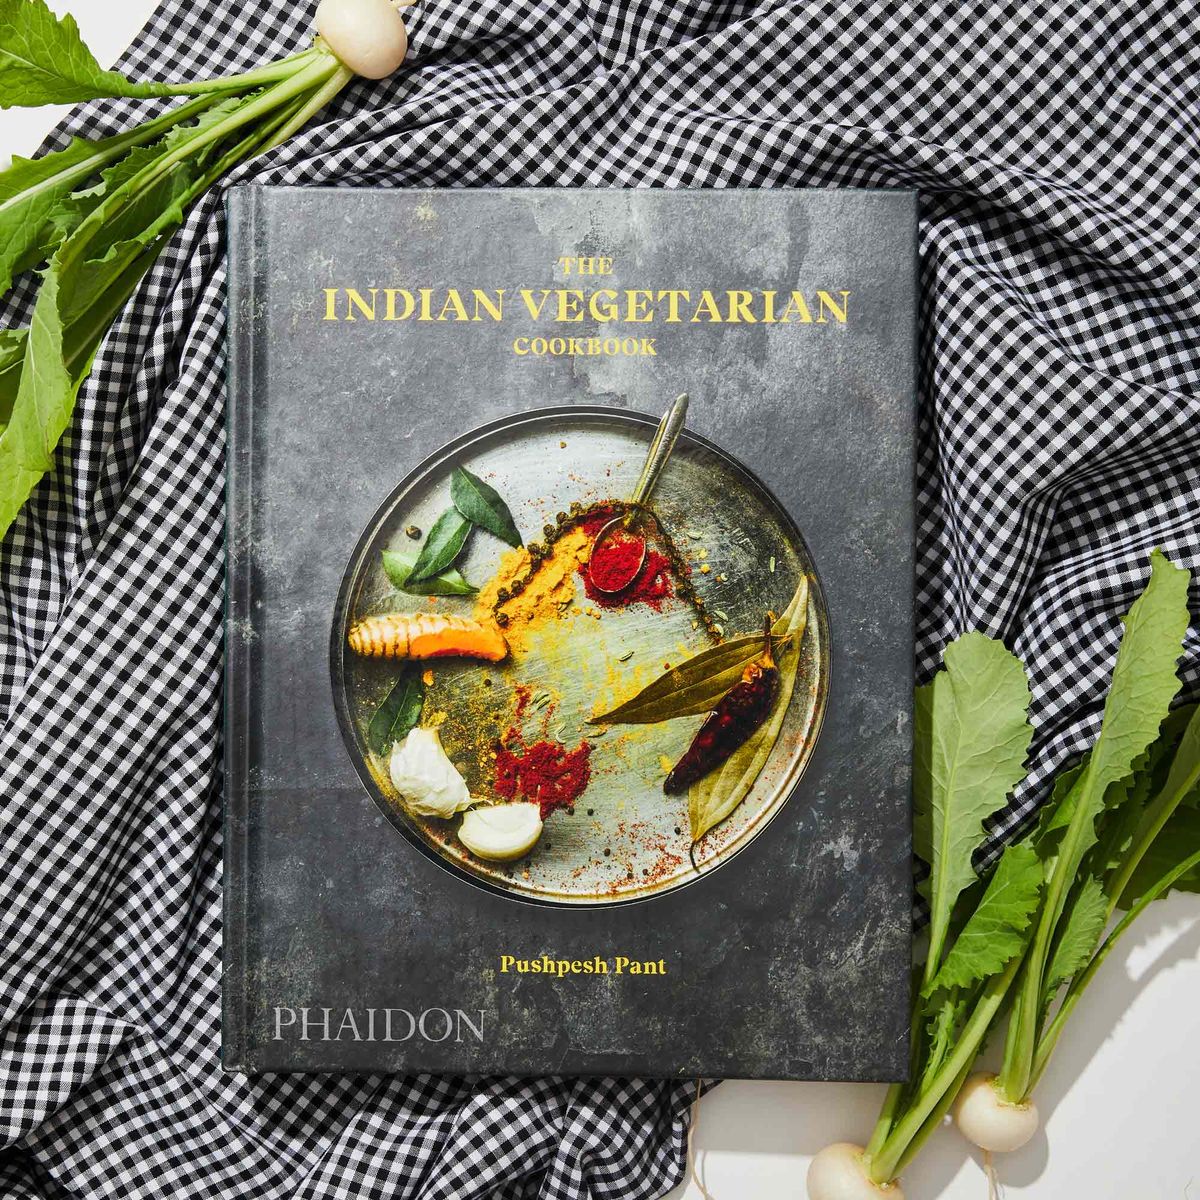 The Indian Vegetarian by Pushpesh Pant resting on a piece of black and white gingham fabric, with radishes around it